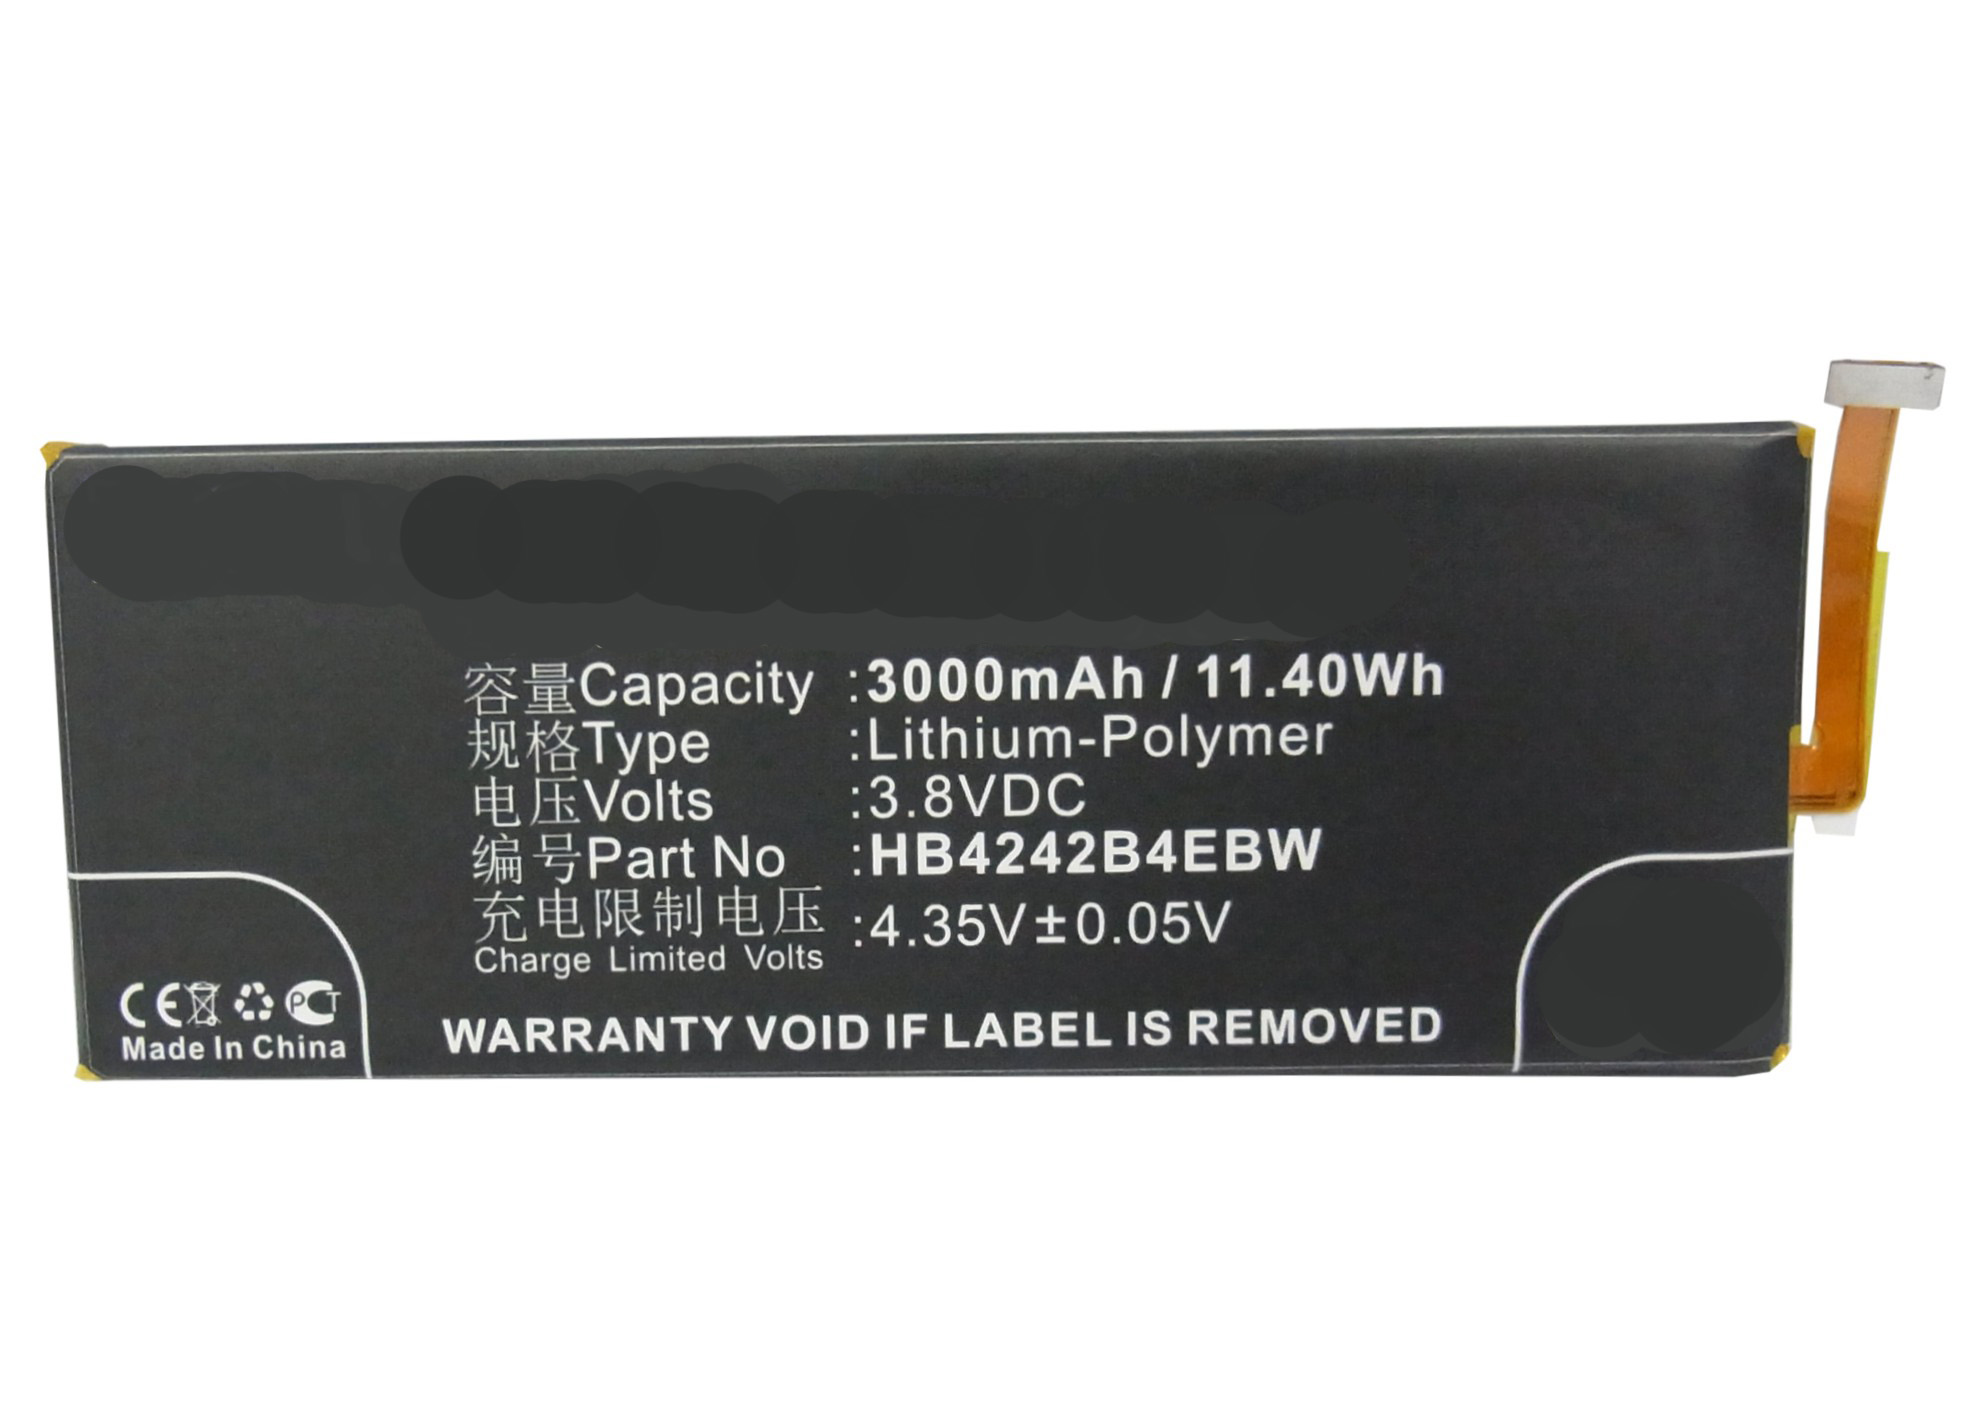 Synergy Digital Cell Phone Battery, Compatiable with HUAWEI HB4242B4EBW Cell Phone Battery (3.8V, Li-Pol, 3000mAh)